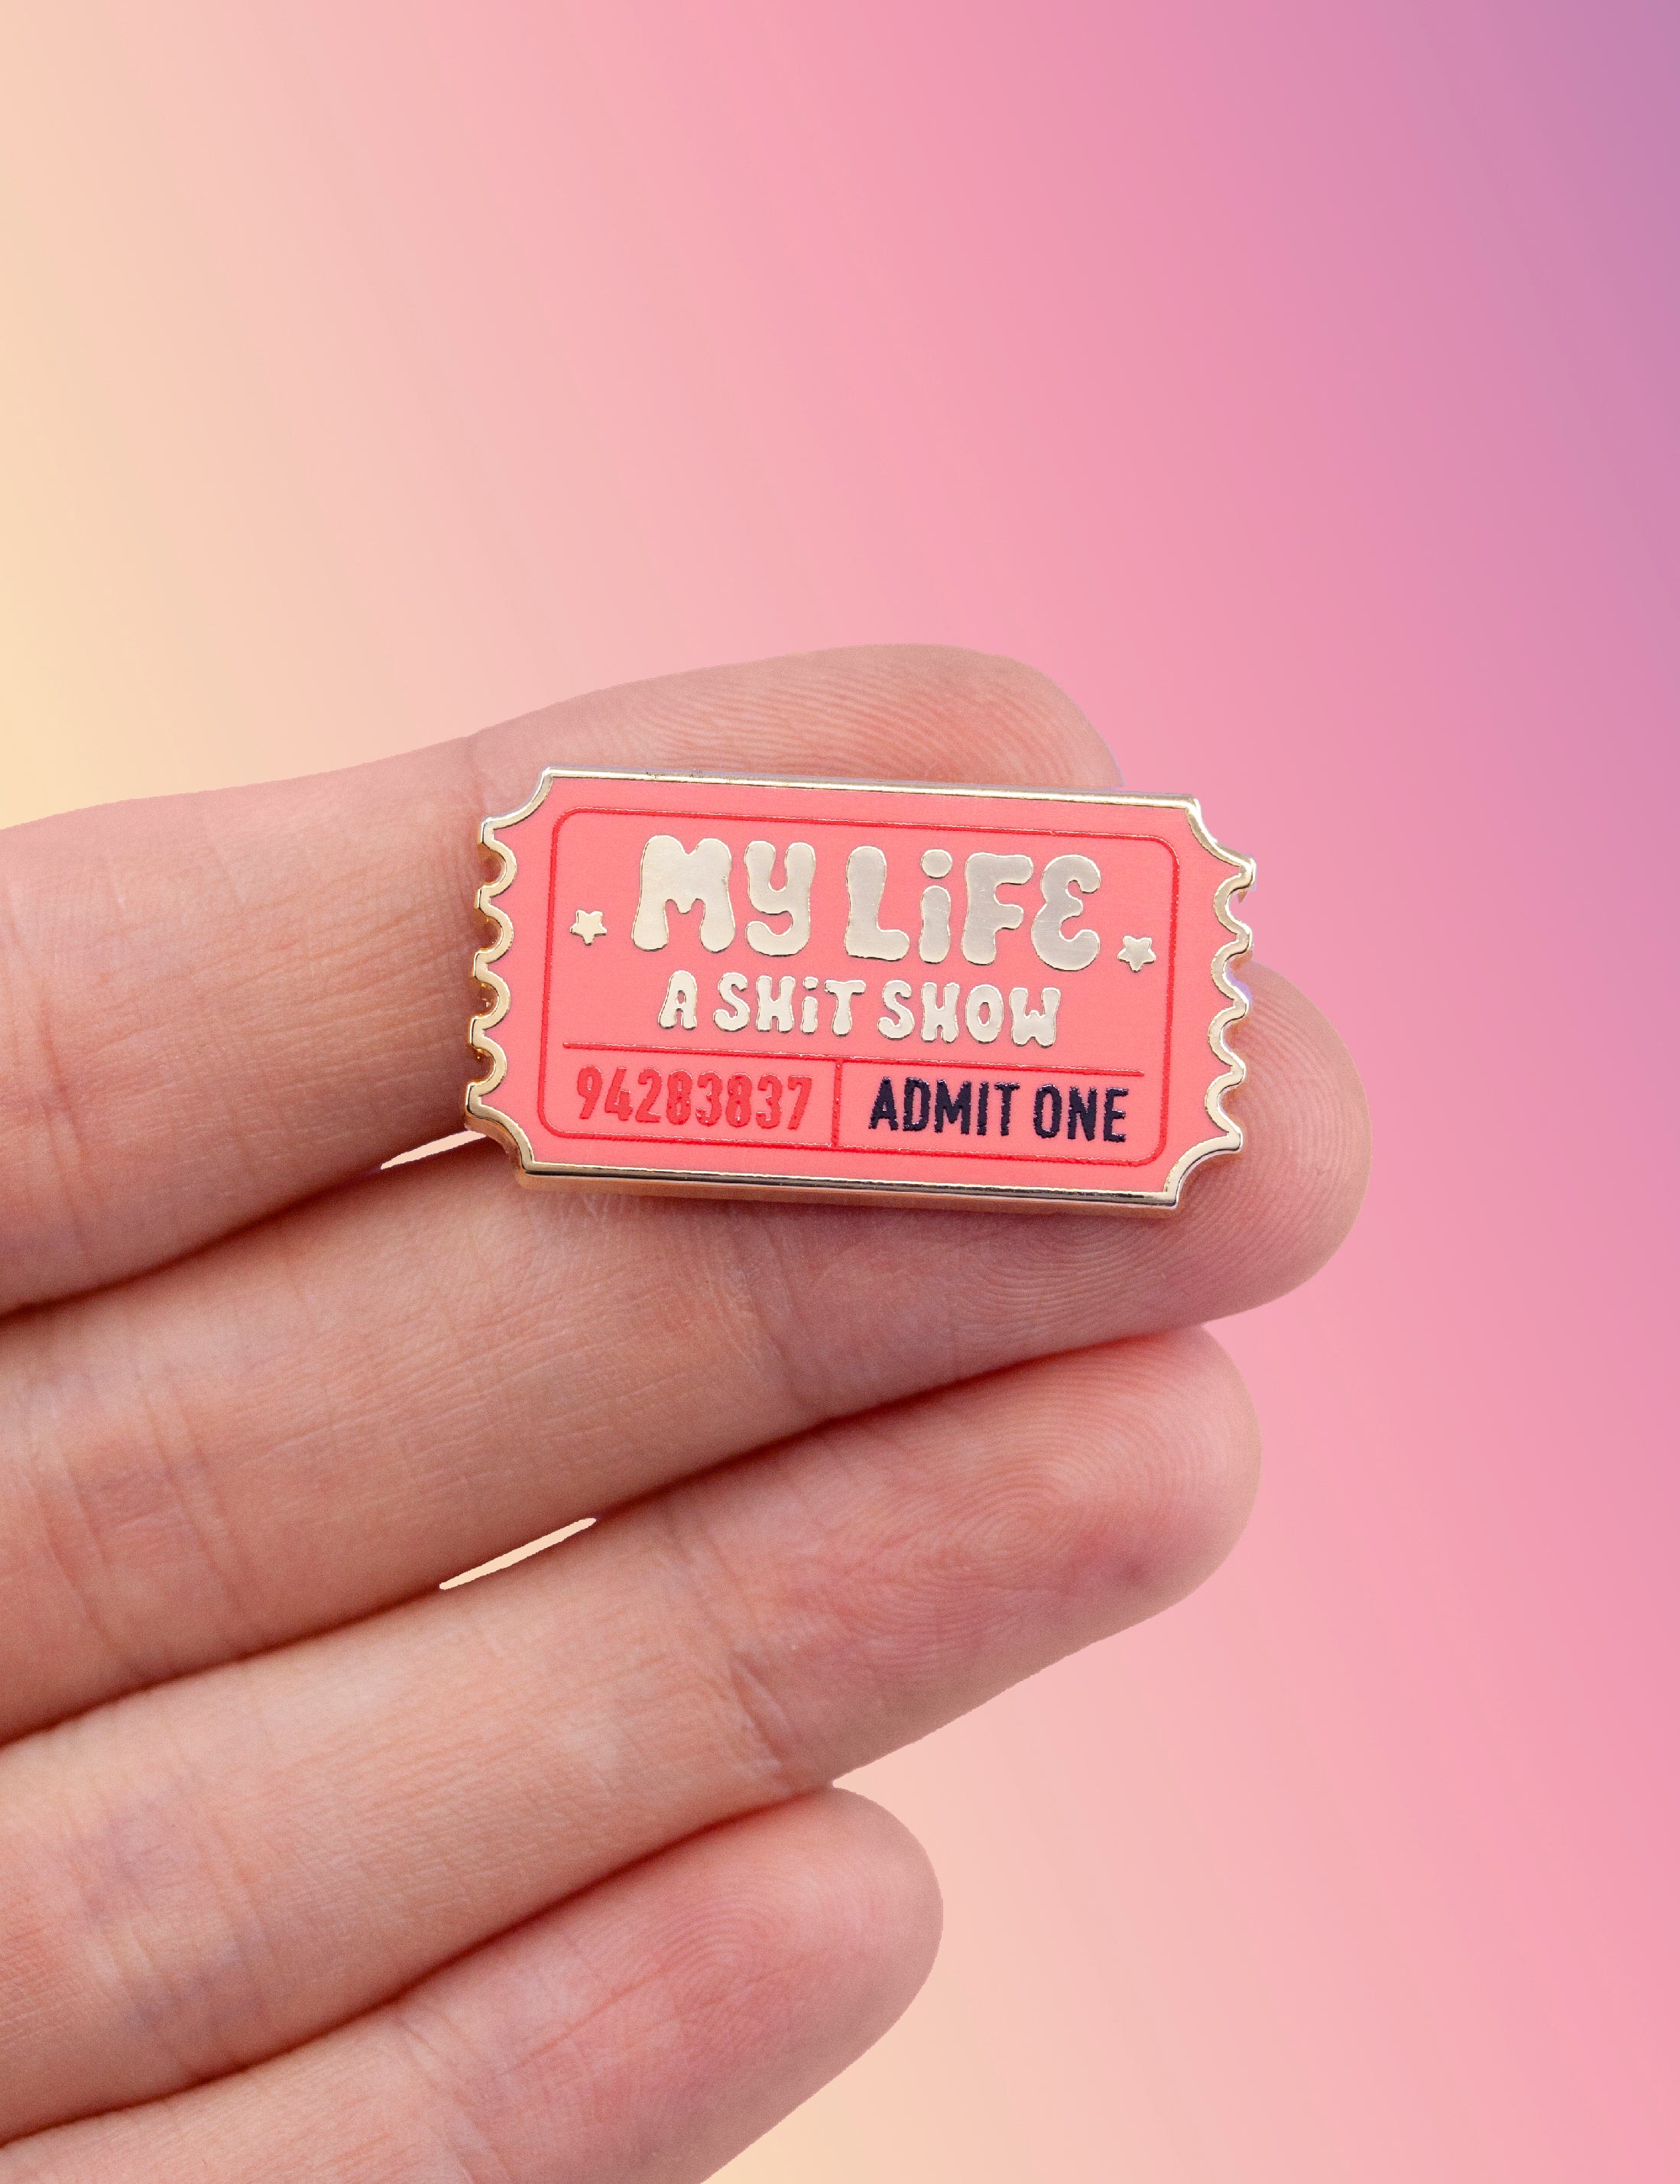 &quot;My life, a shit show&quot; ticket Pin